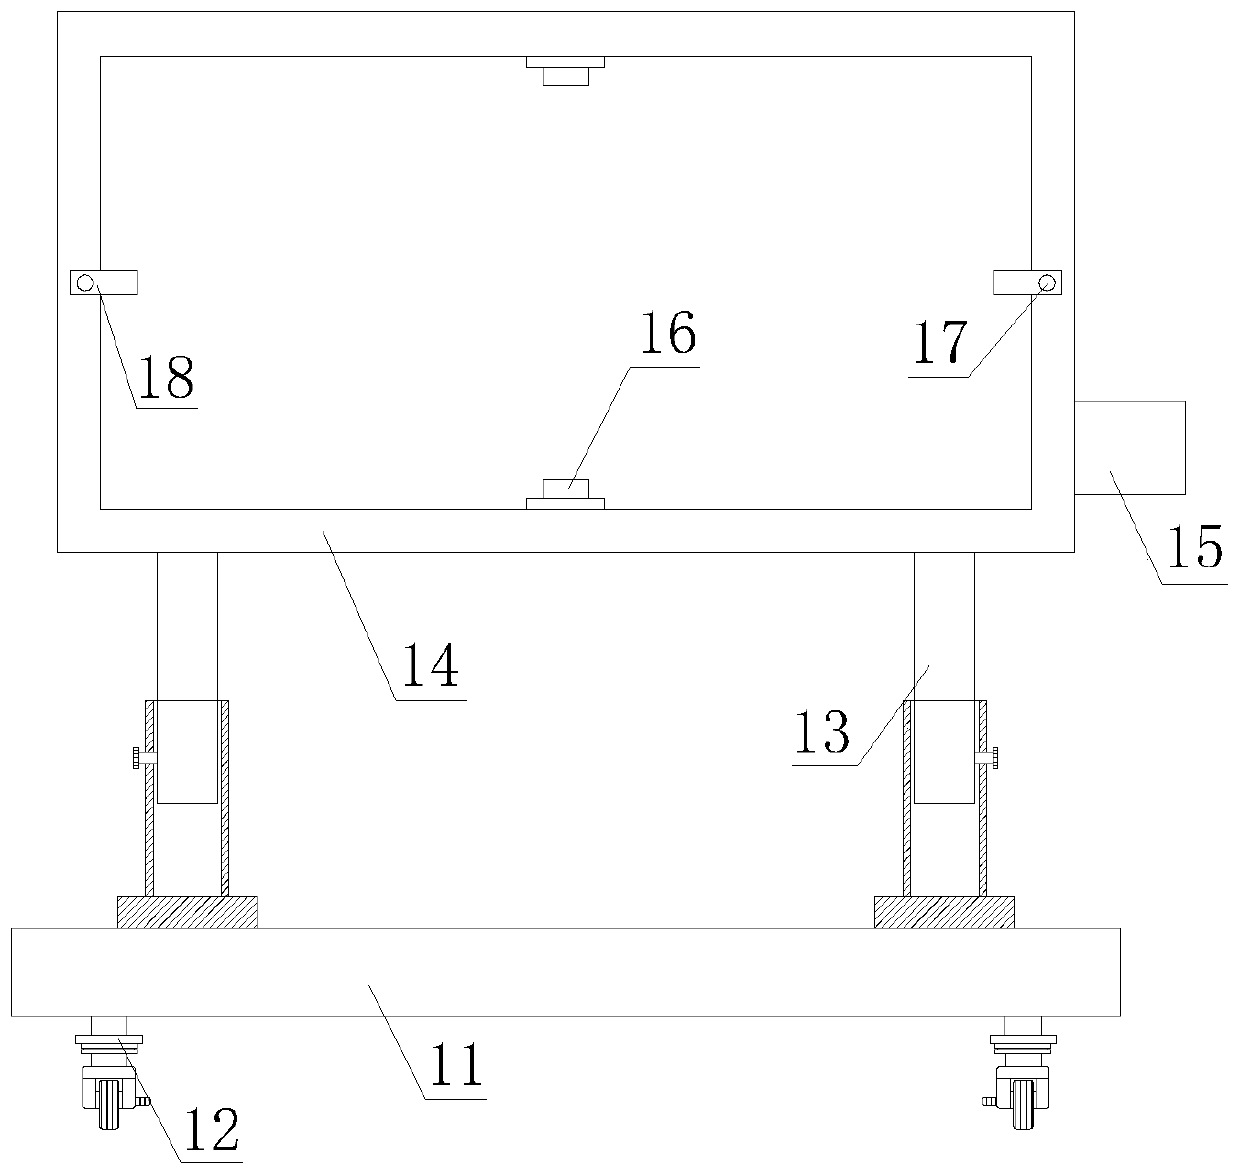 Multimedia display system for teaching